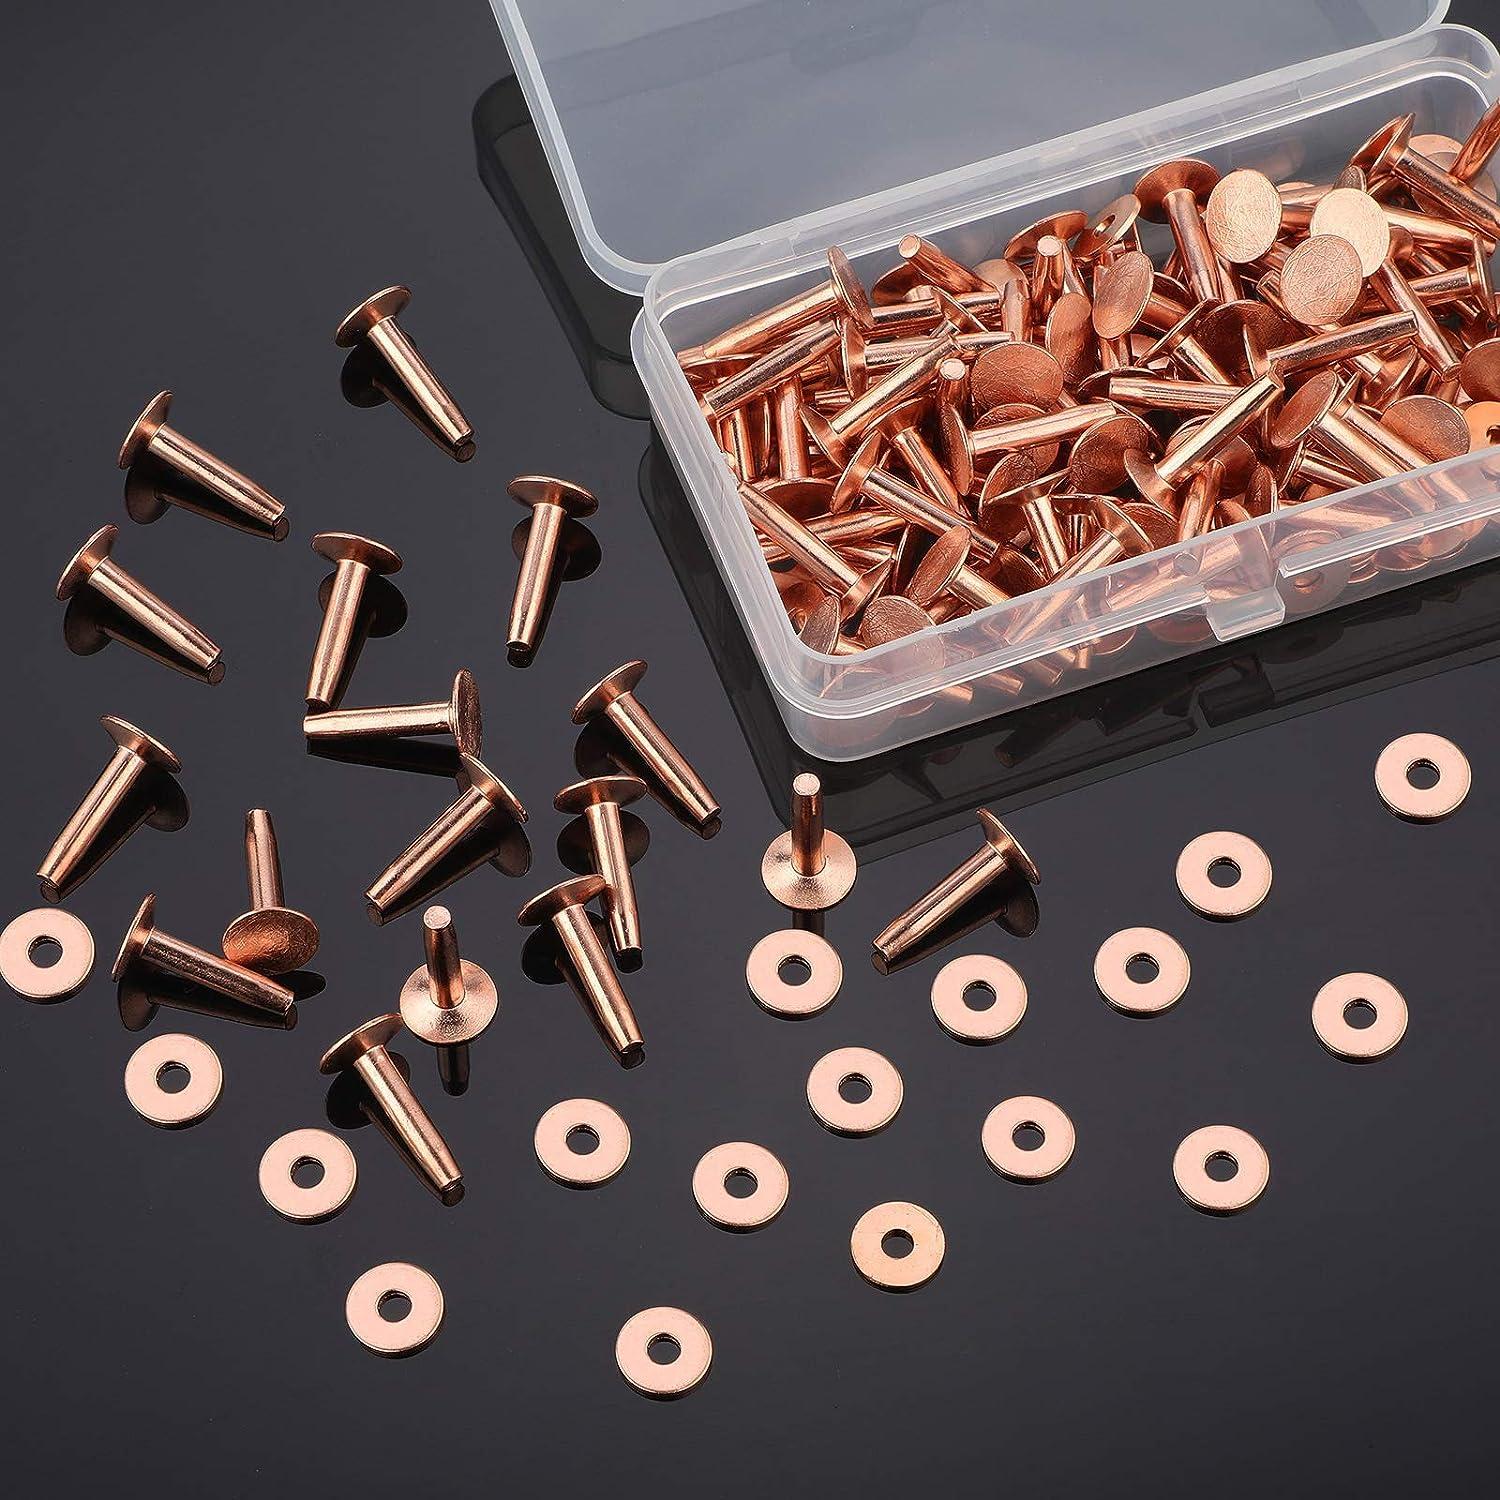 Dome Head Copper Rivets - 1/16 Inch - Leather Craft Supplies